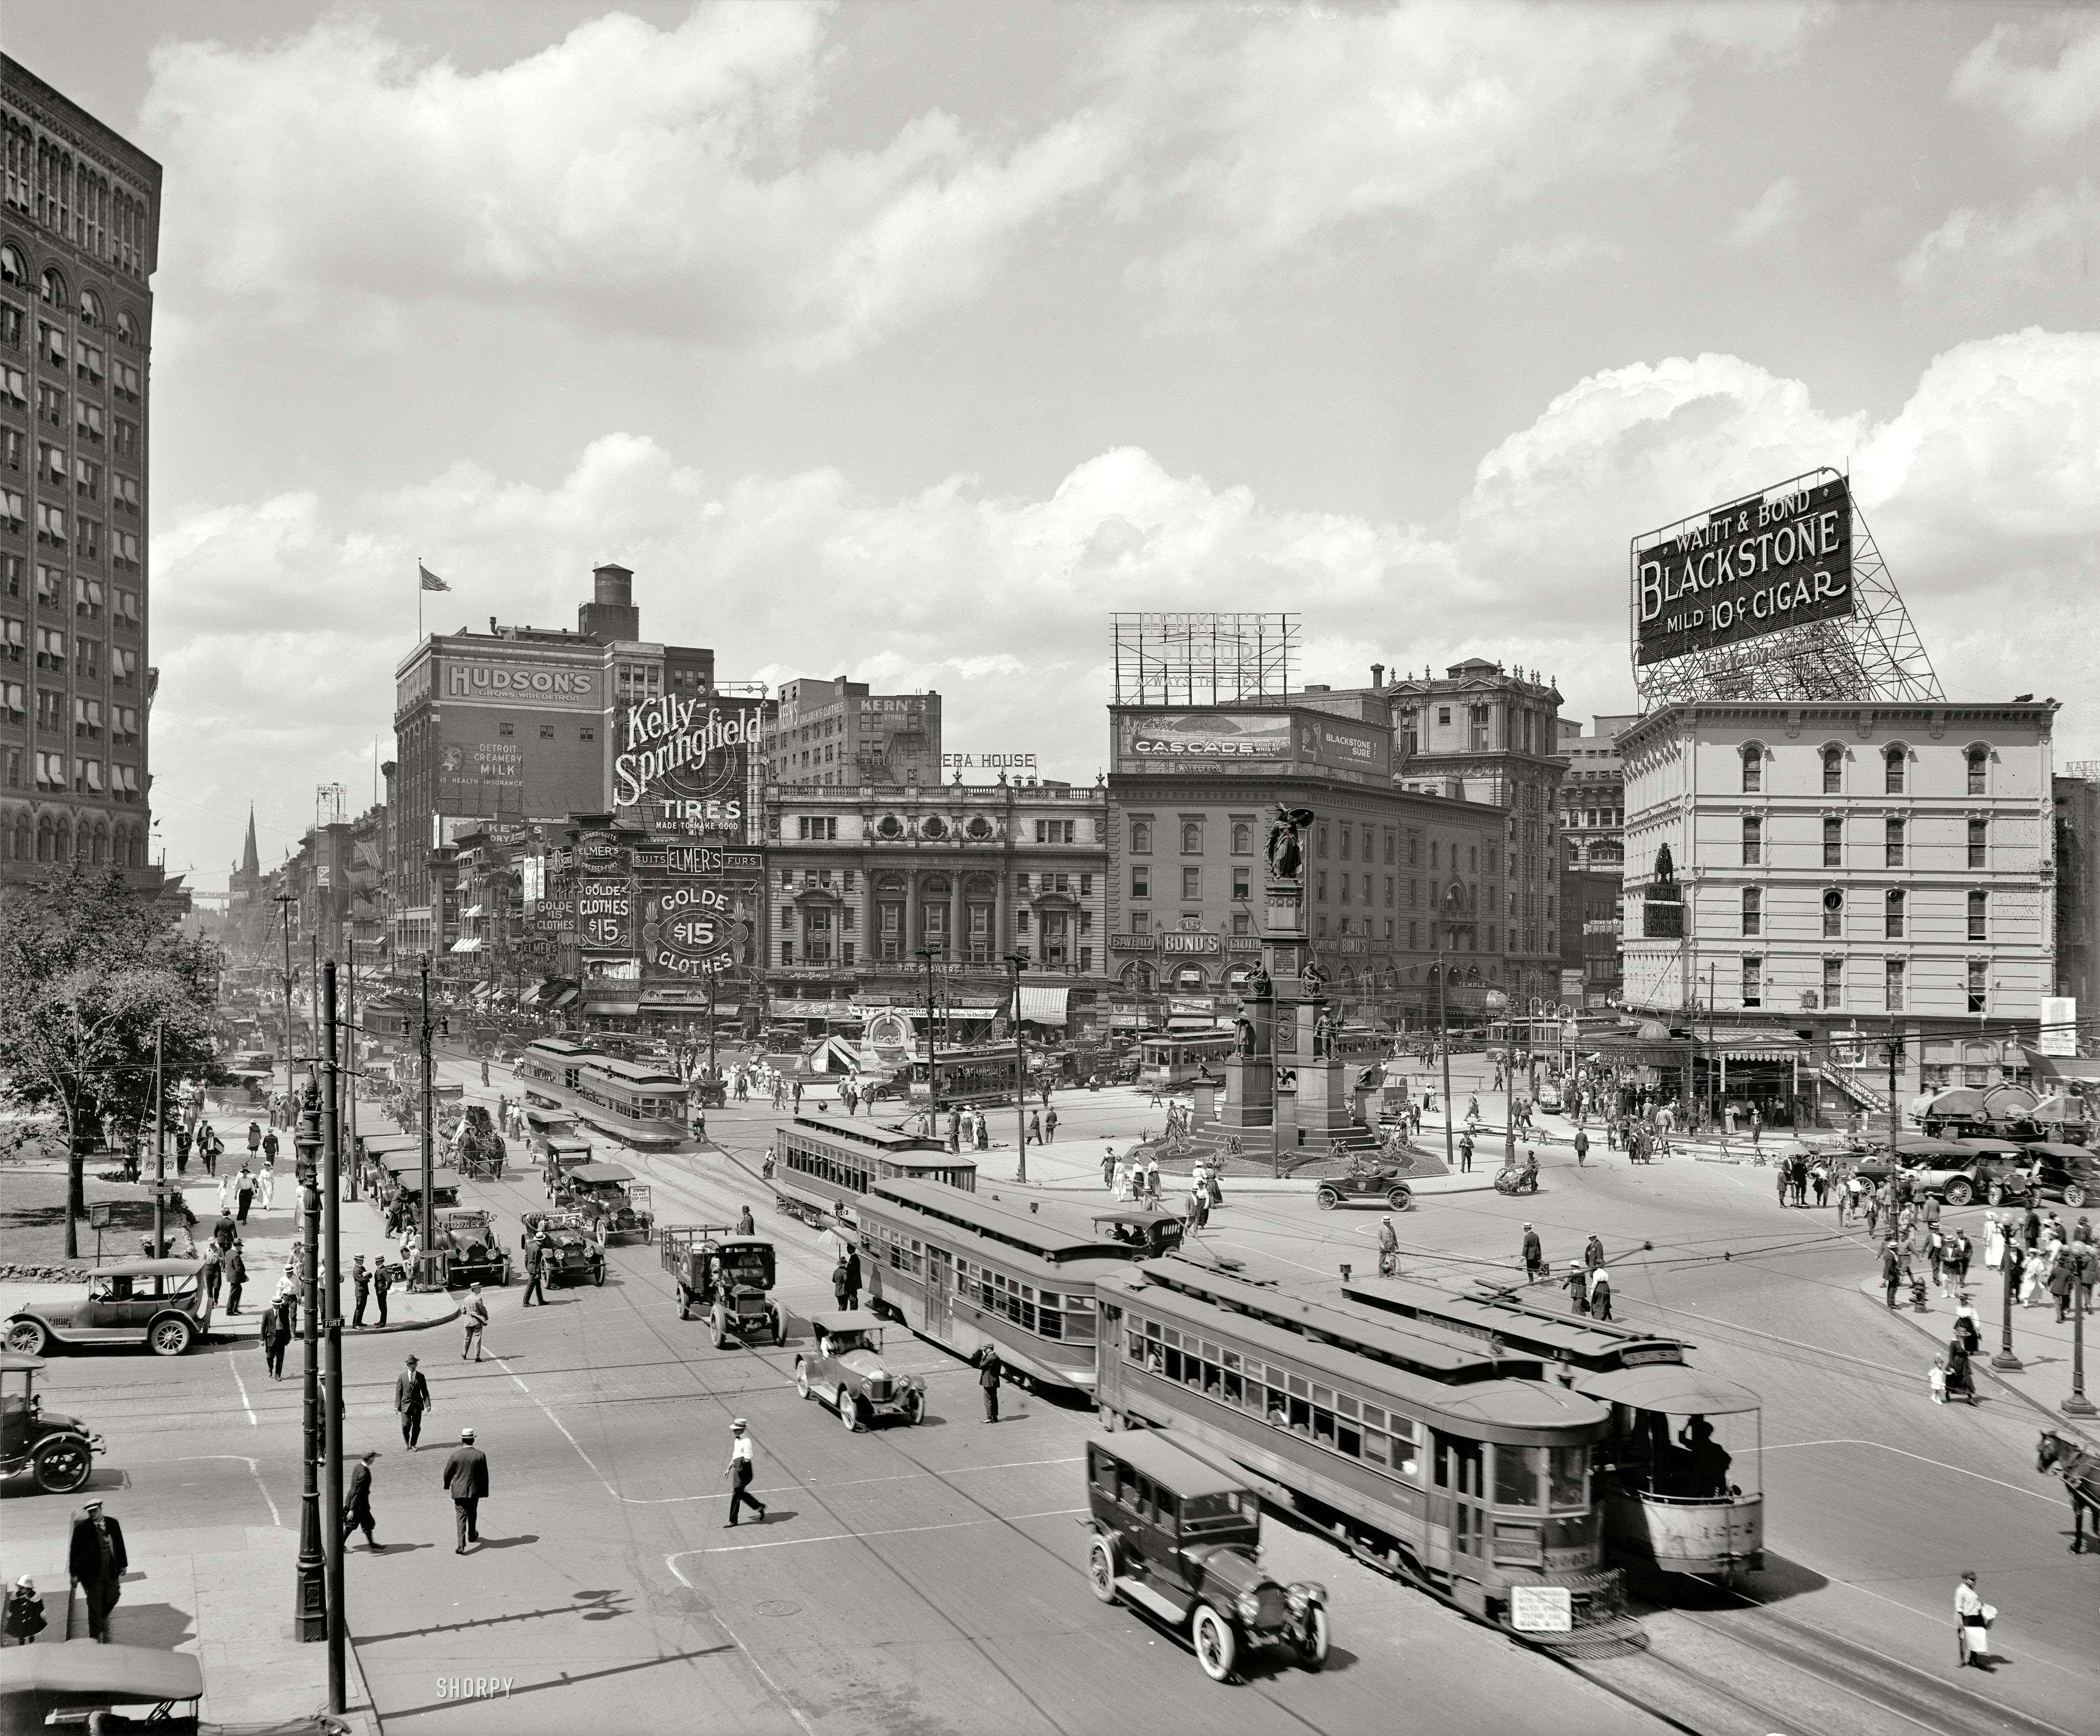 Detroit circa 1917. "Looking up Woodward Avenue." A bustling vista last glimpsed here. 8x10 inch glass negative, Detroit Publishing Company. View full size.